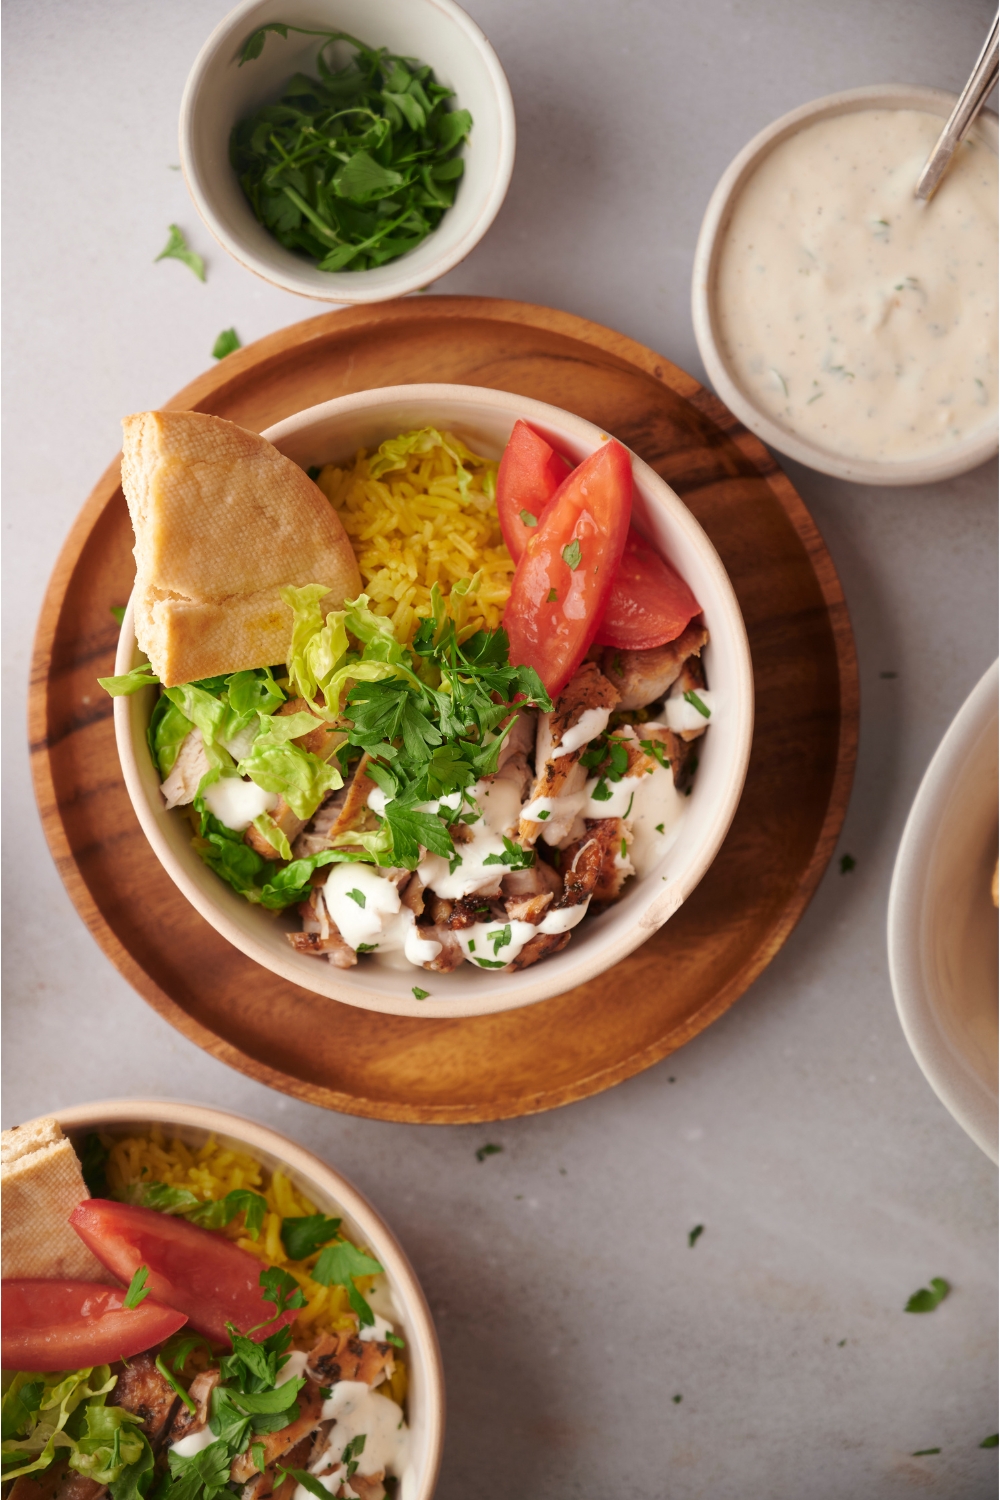 Halal chicken over rice in a white bowl on a wood plate. There is a wedge of pita bread in the bowl and an assortment of ingredients surrounding the bowl of chicken and rice.